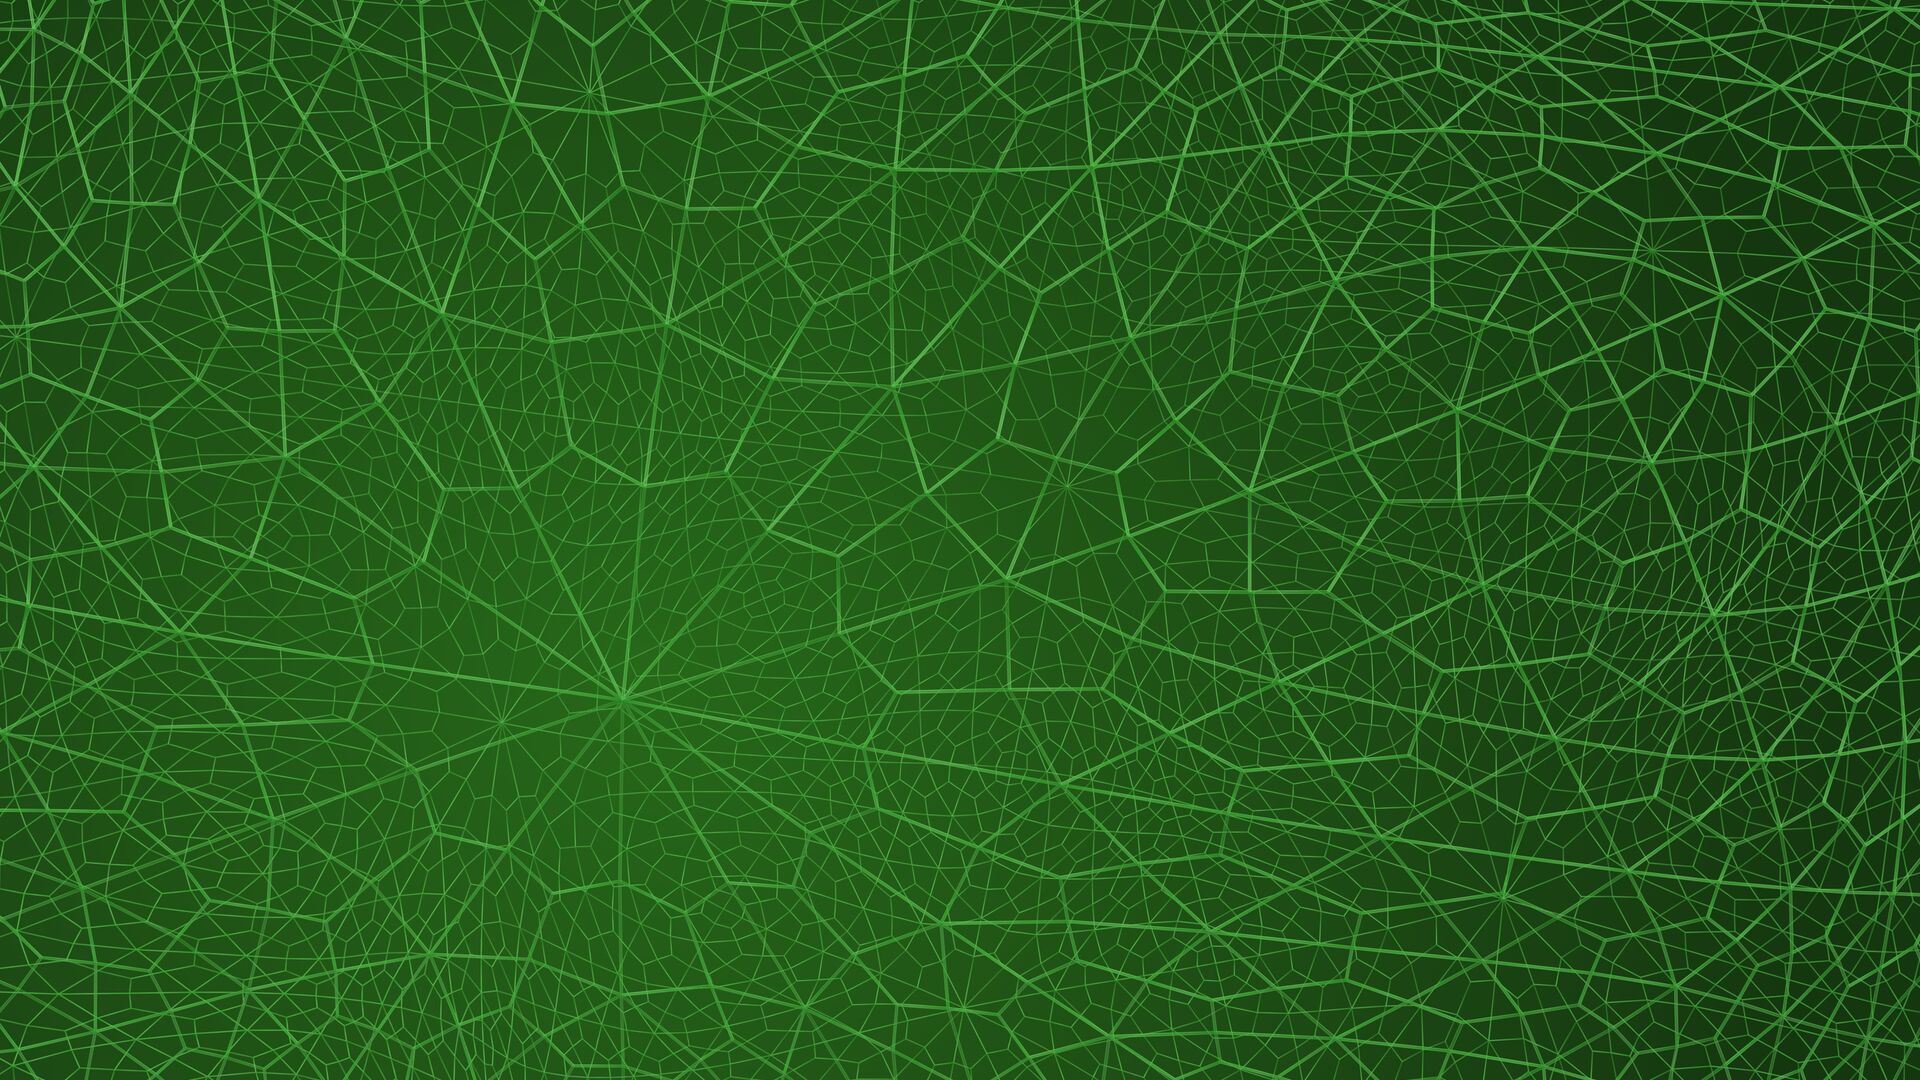 A green backdrop with webbing all around it, a general green mesh background depicting environmental conservation.